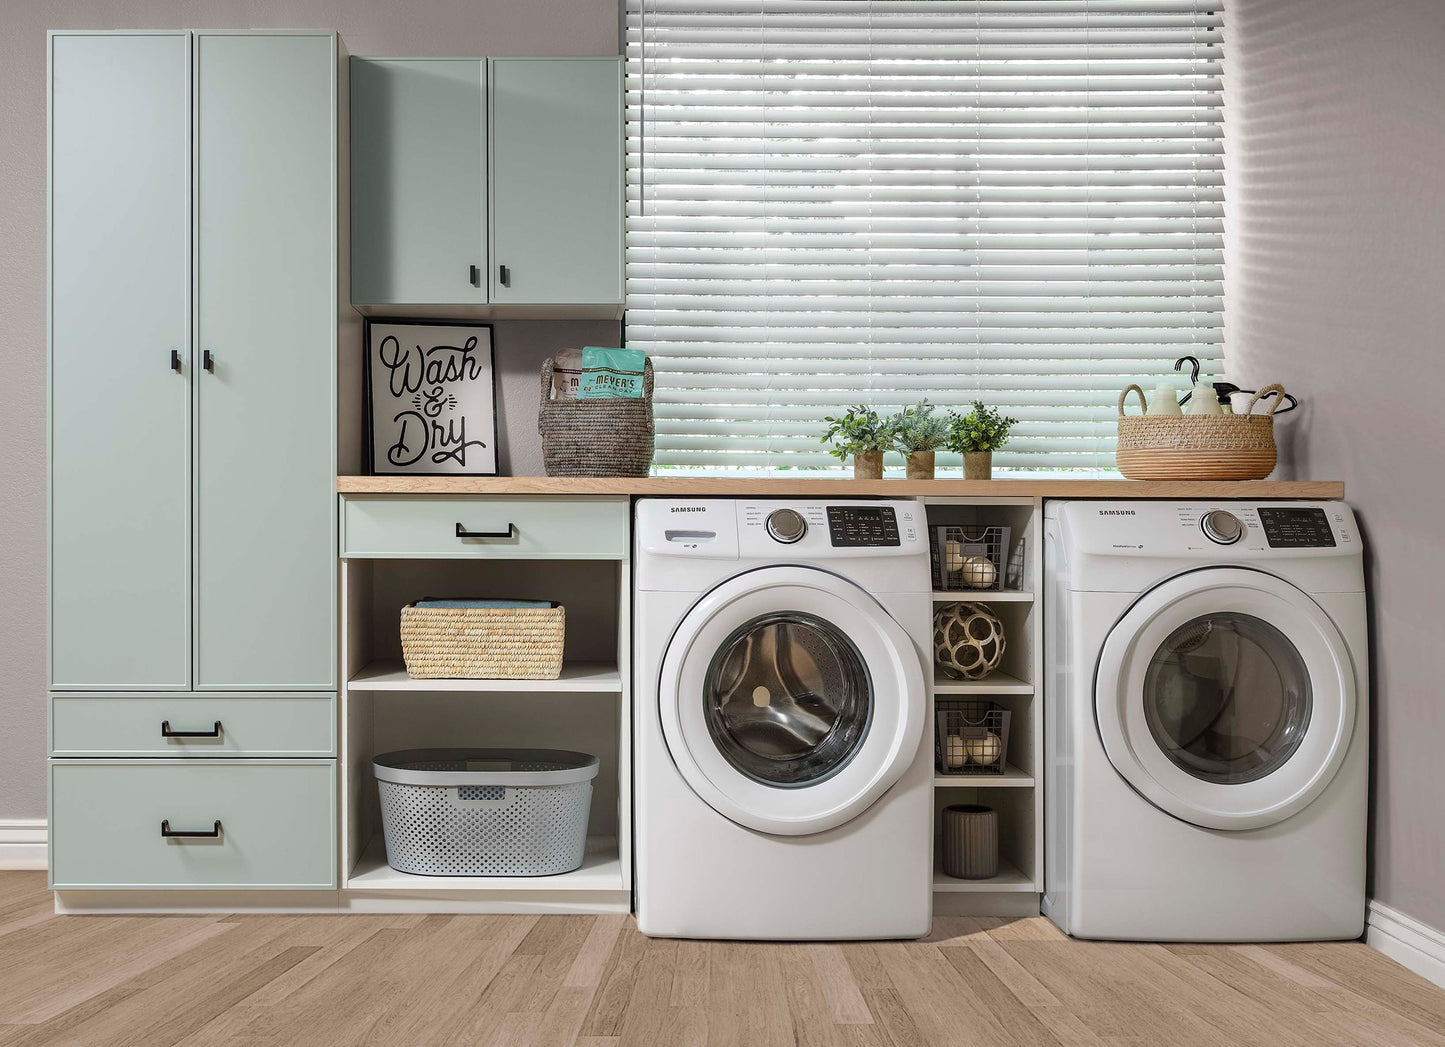 The Laundry Room of Your Dreams